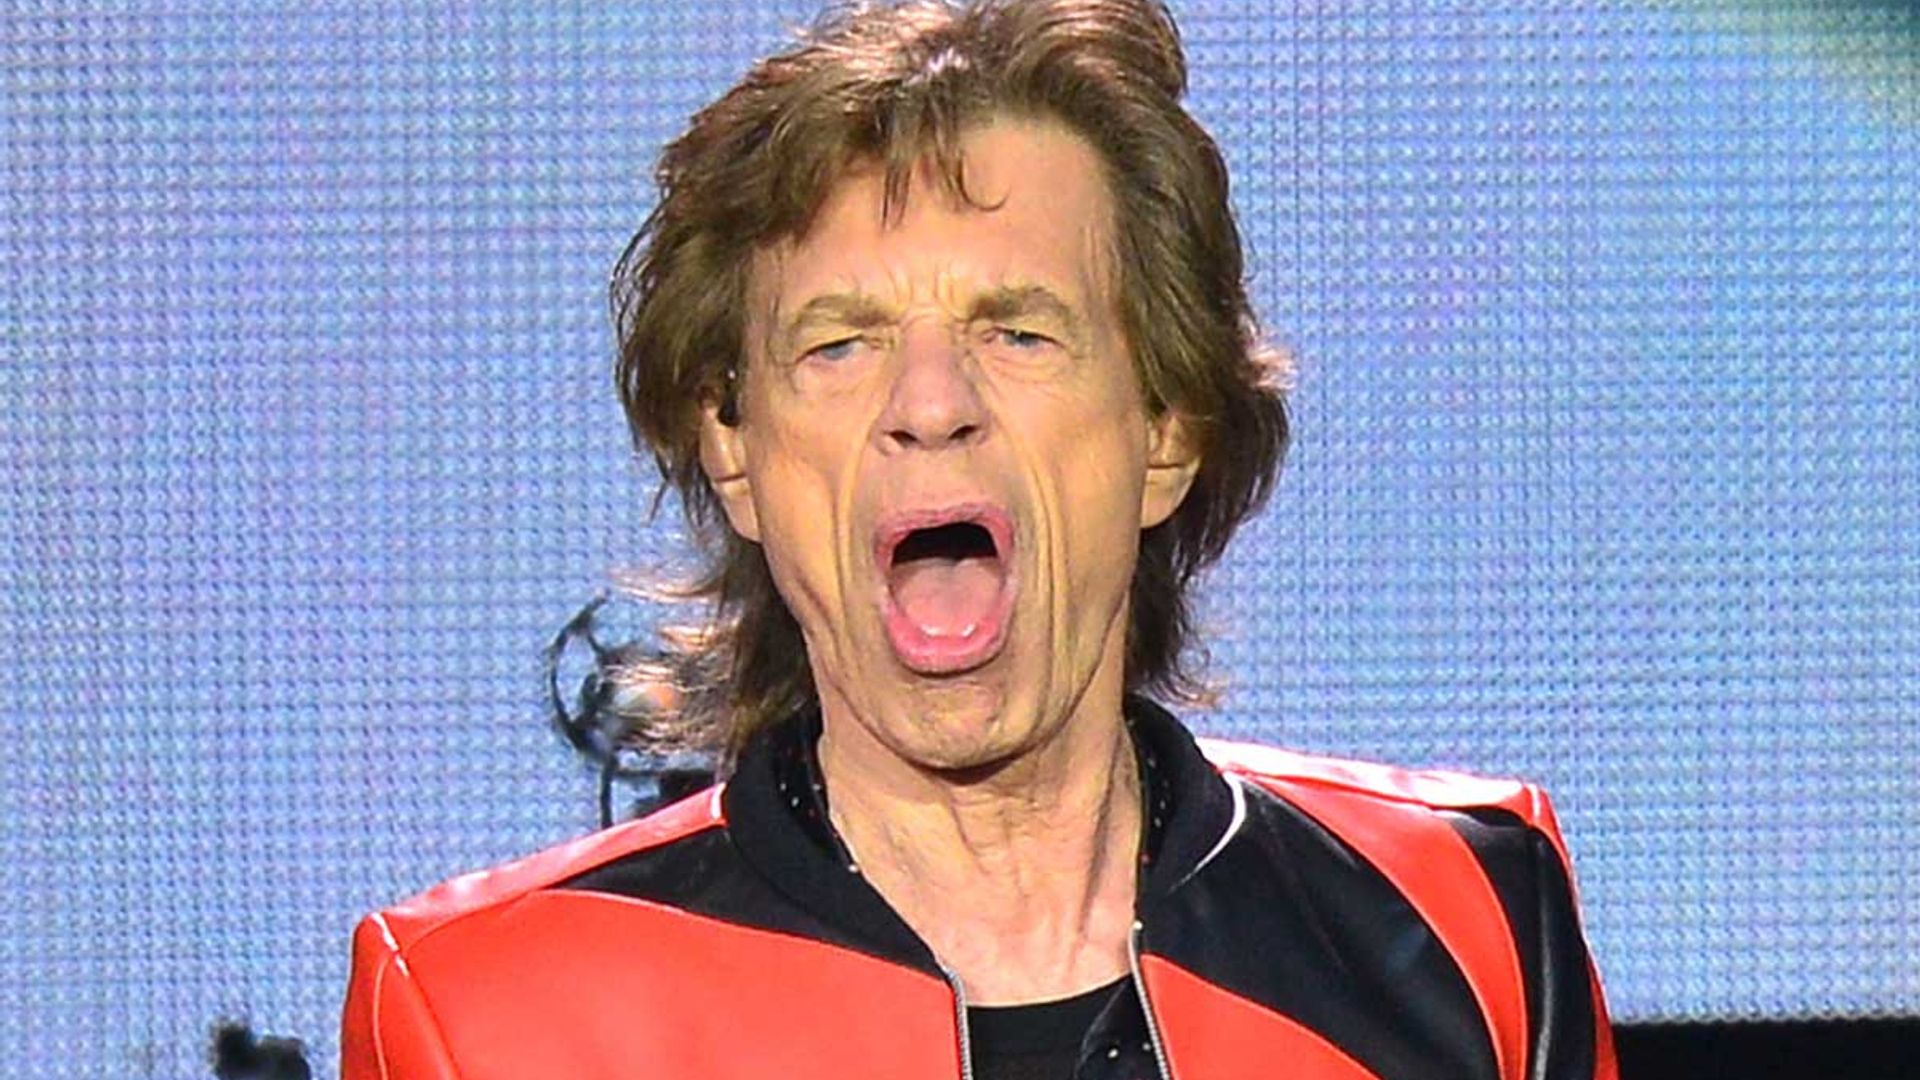 Mick Jagger inundated with support amid Covid battle